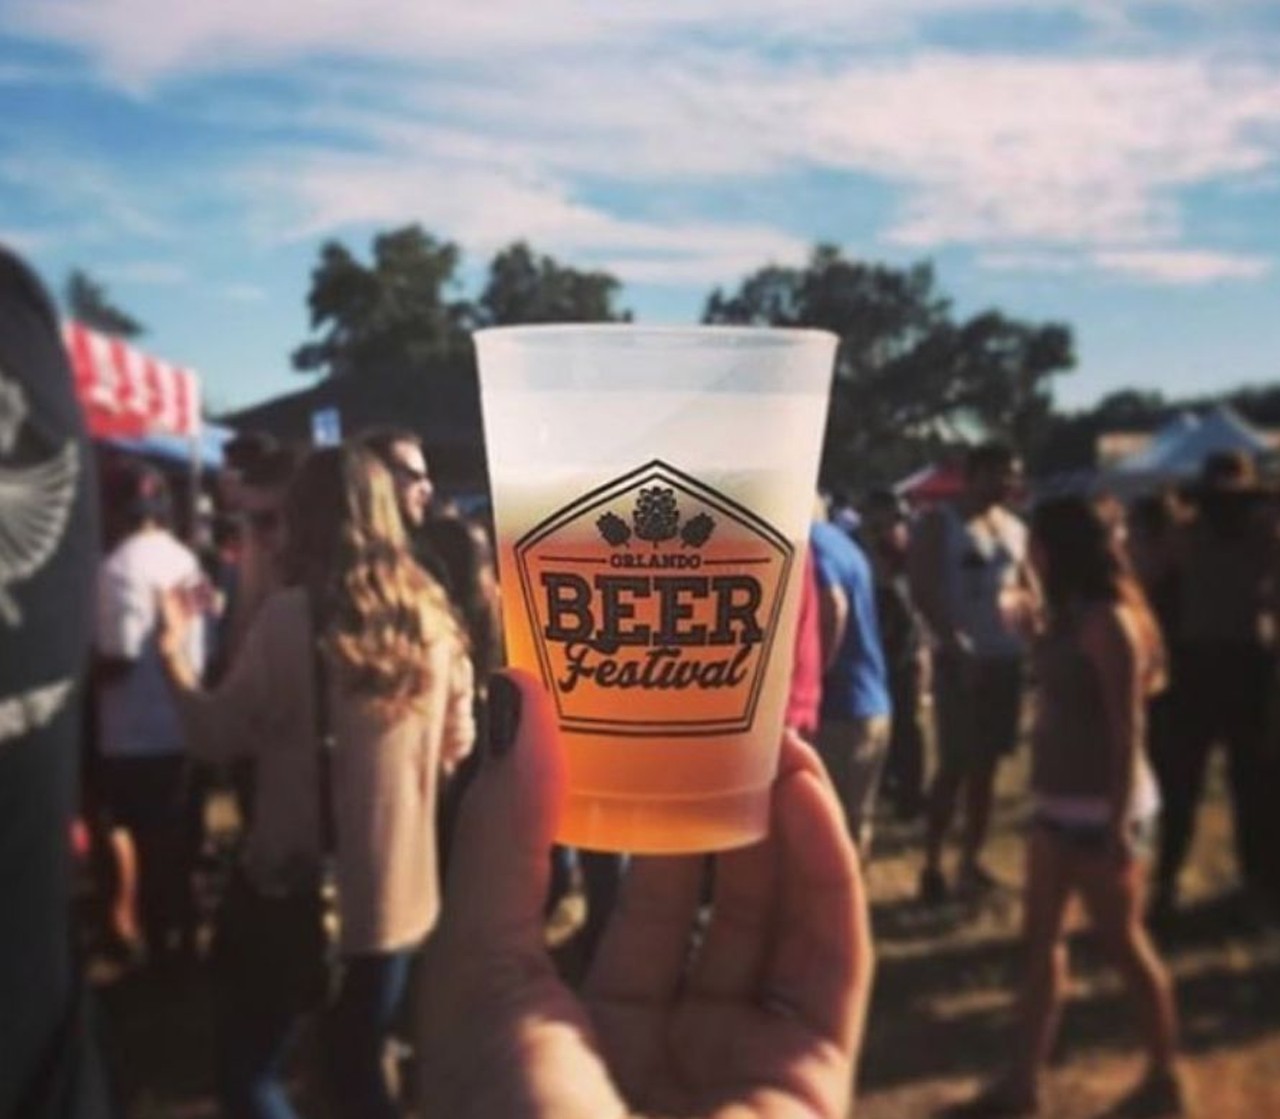 Saturday, Nov. 11 
Orlando Beer Festival
More than 200 craft beers from local and regional breweries. A portion of proceeds benefit the Coalition for the Homeless of Central Florida.
1-5 pm; Festival Park, 2911 E. Robinson St.; $40-$75; 407-381-5310 orlandoweeklytickets.com
Photo via orlandoweekly/Instagram